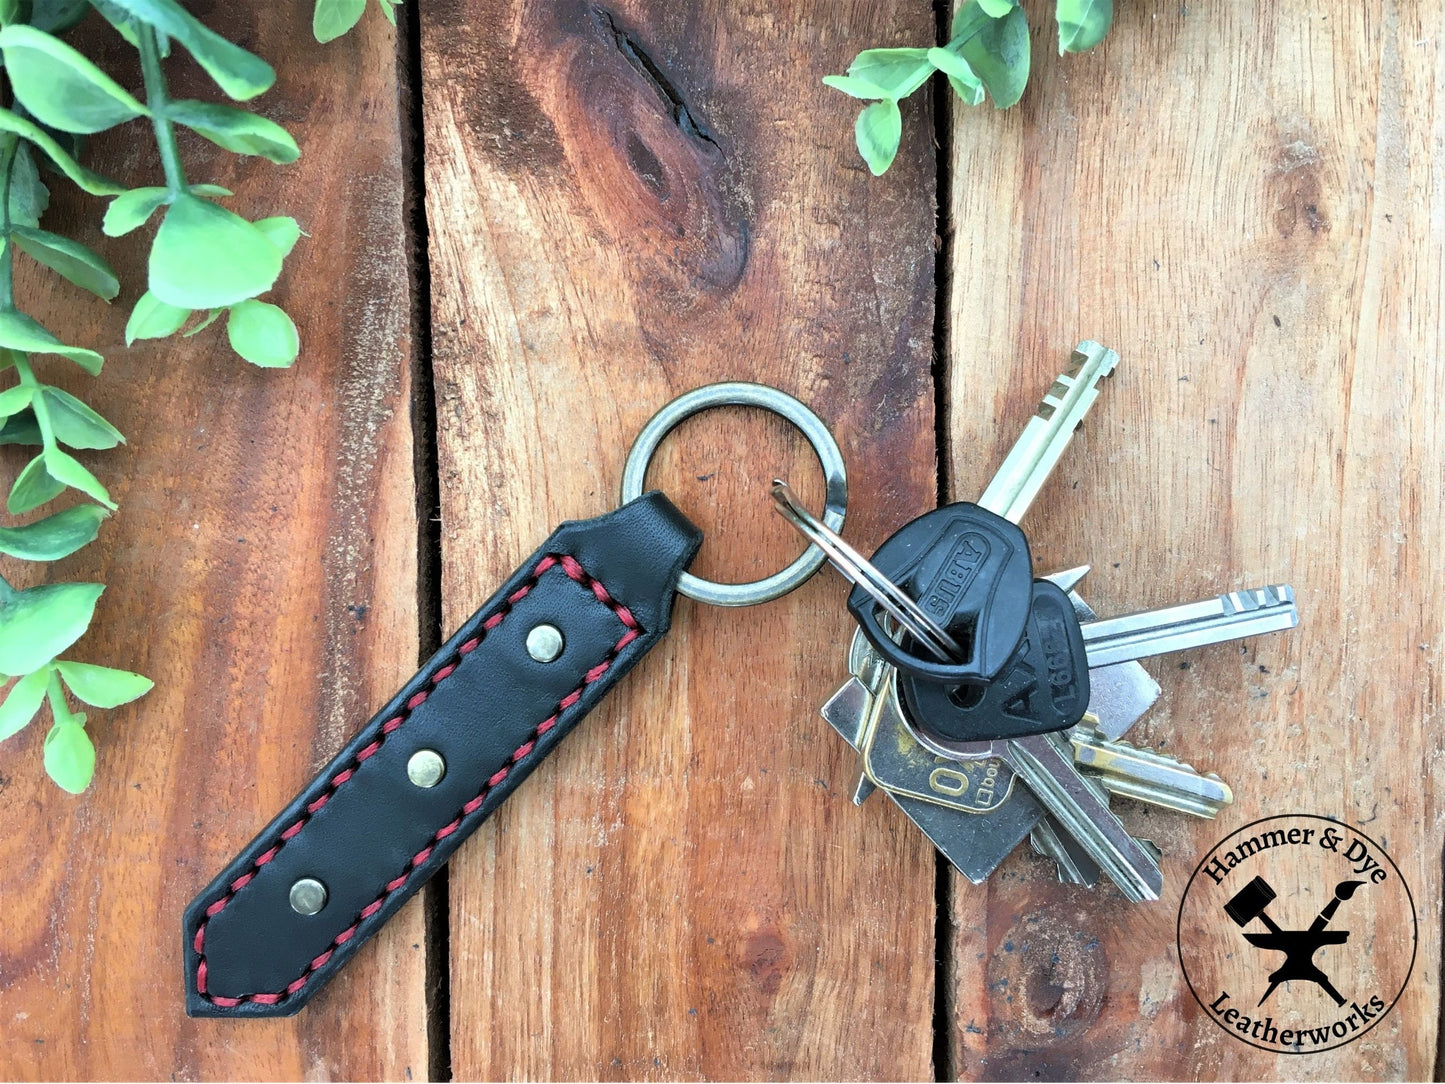 Handmade Black Leather Studded Keychain with Red Stitching with keys